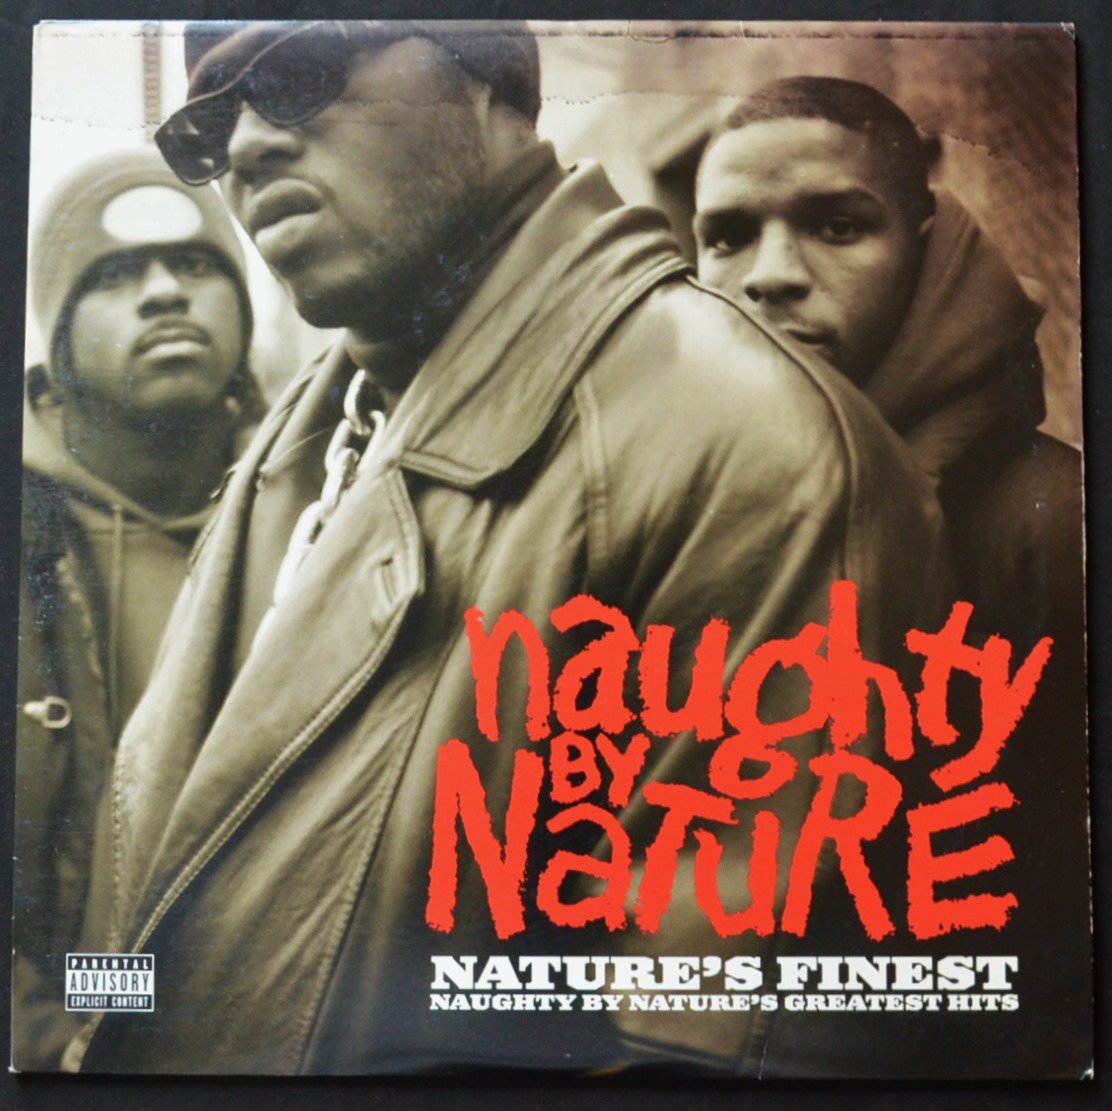 NAUGHTY BY NATURE / NATURE'S FINEST (NAUGHTY BY NATURE'S GREATEST HITS) (2LP)